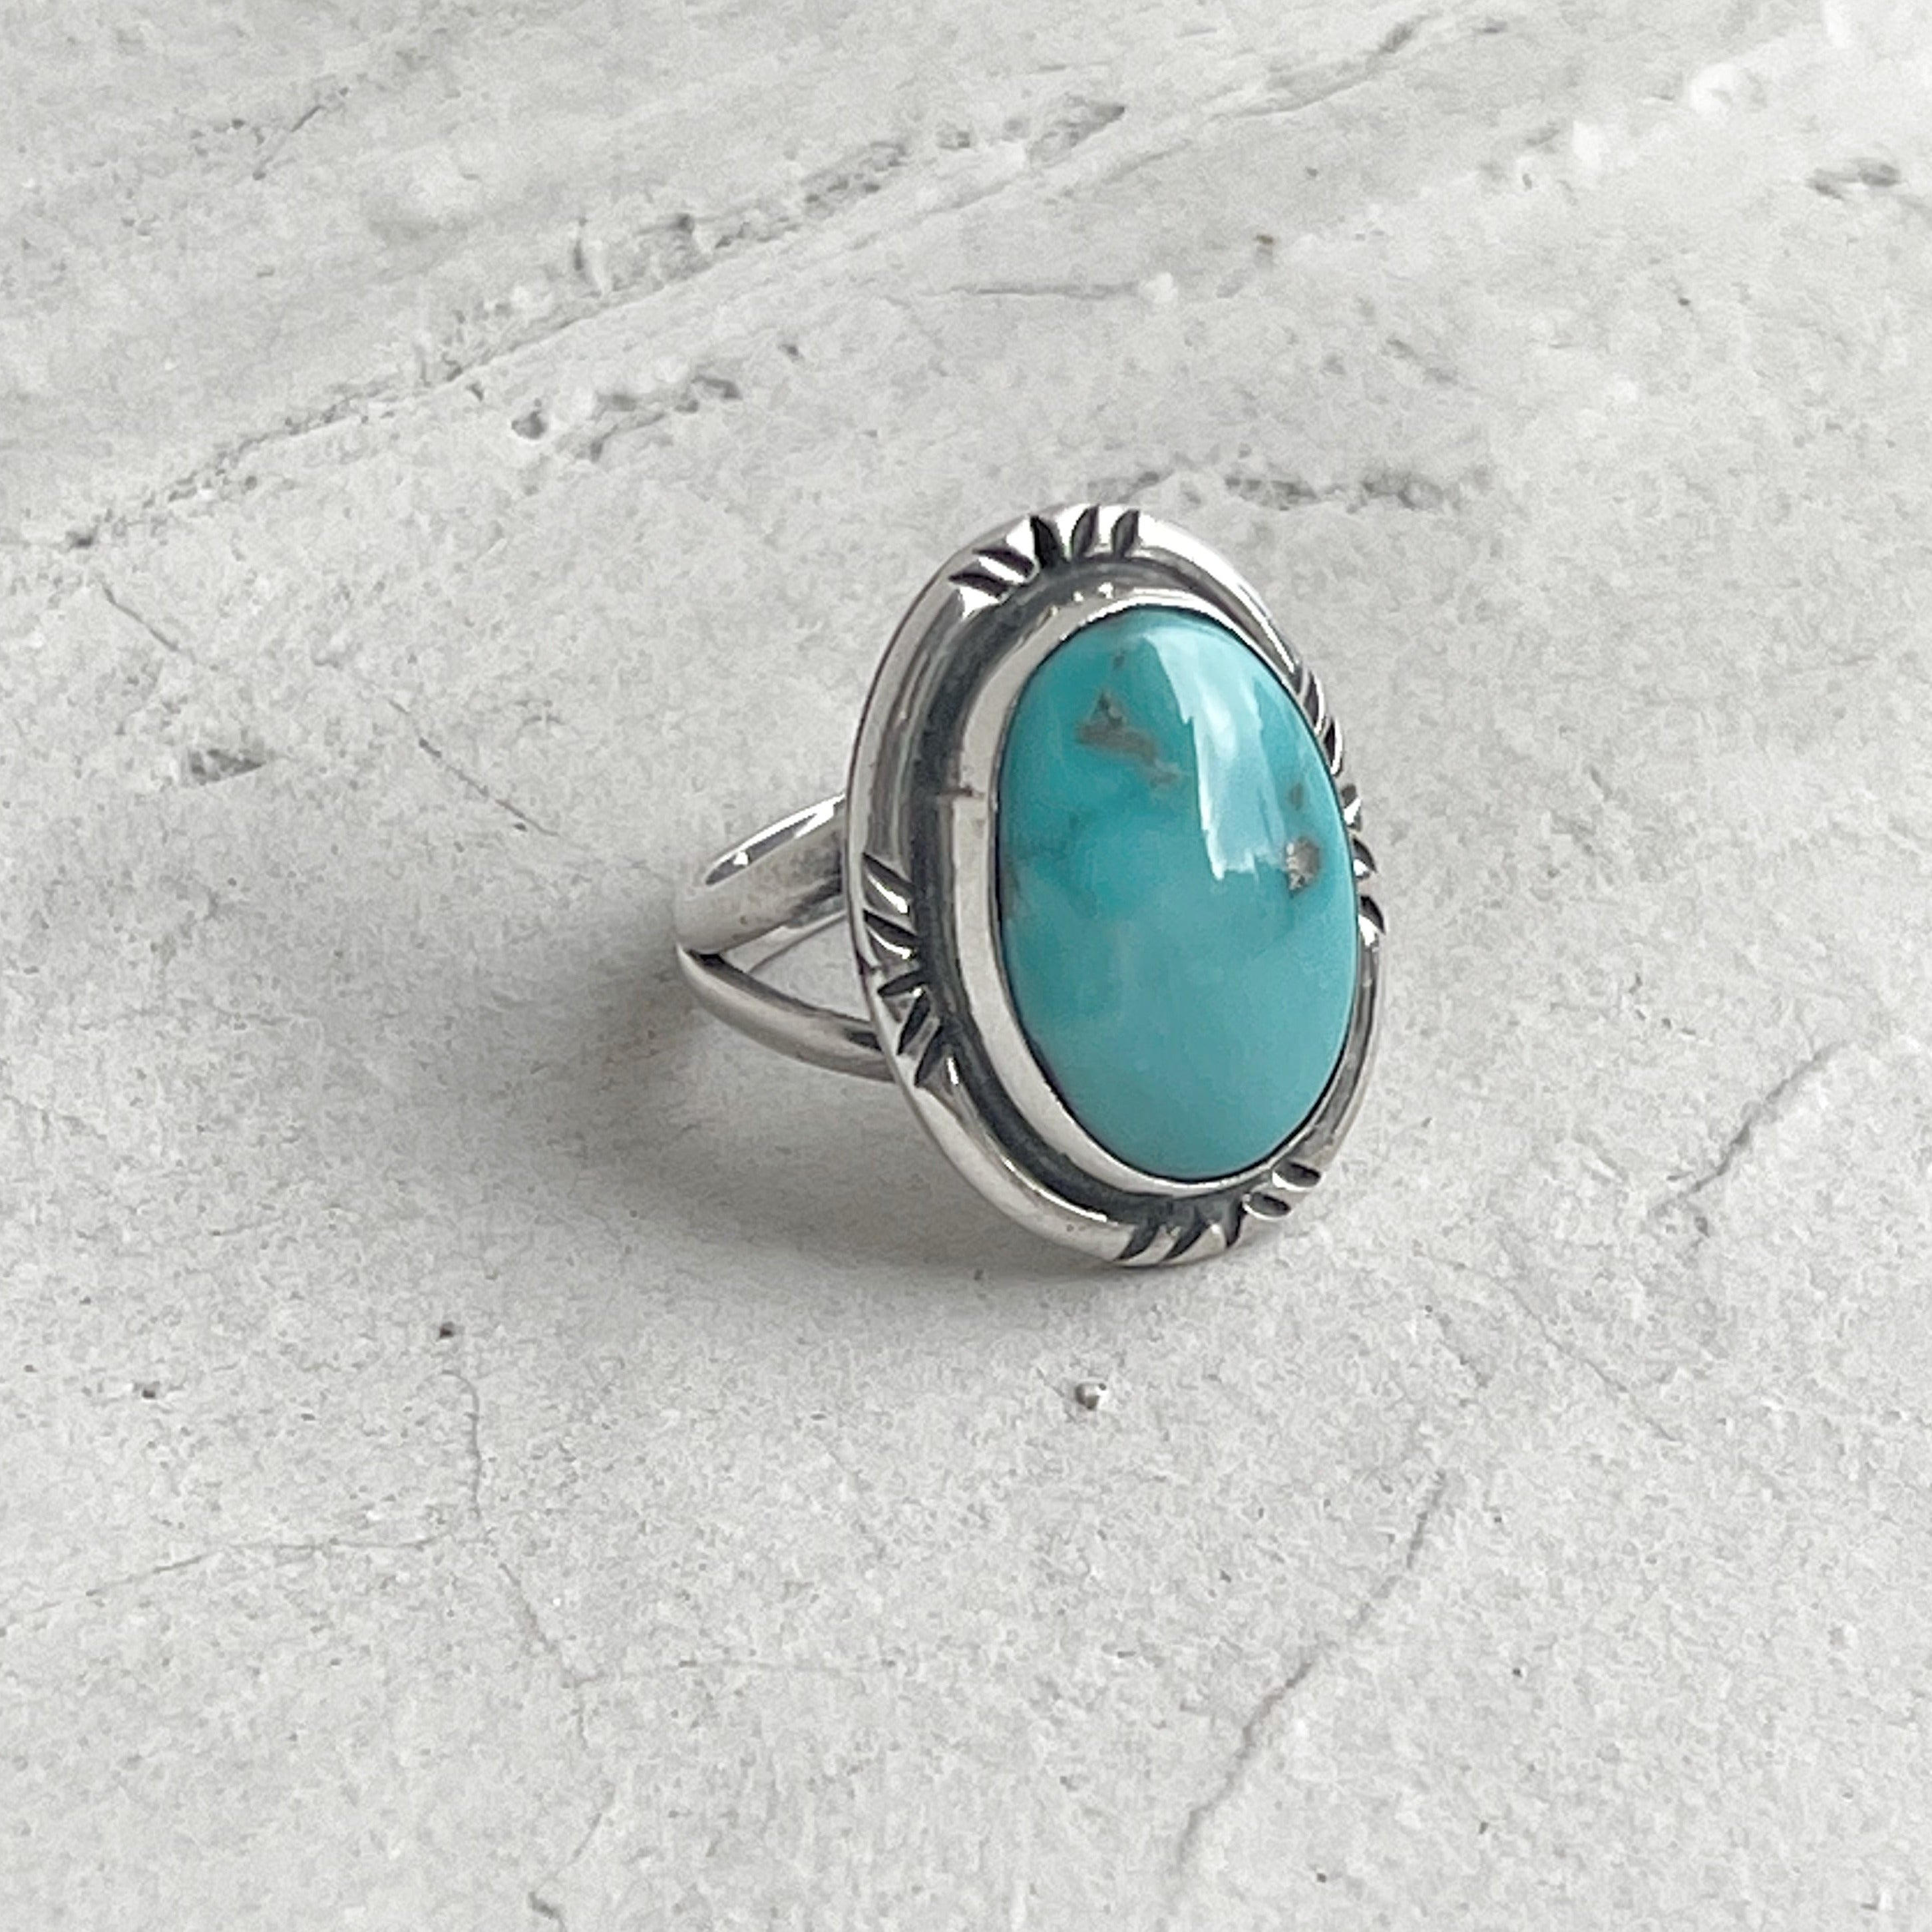 Oval Handcrafted 980 Silver Turquoise Ring